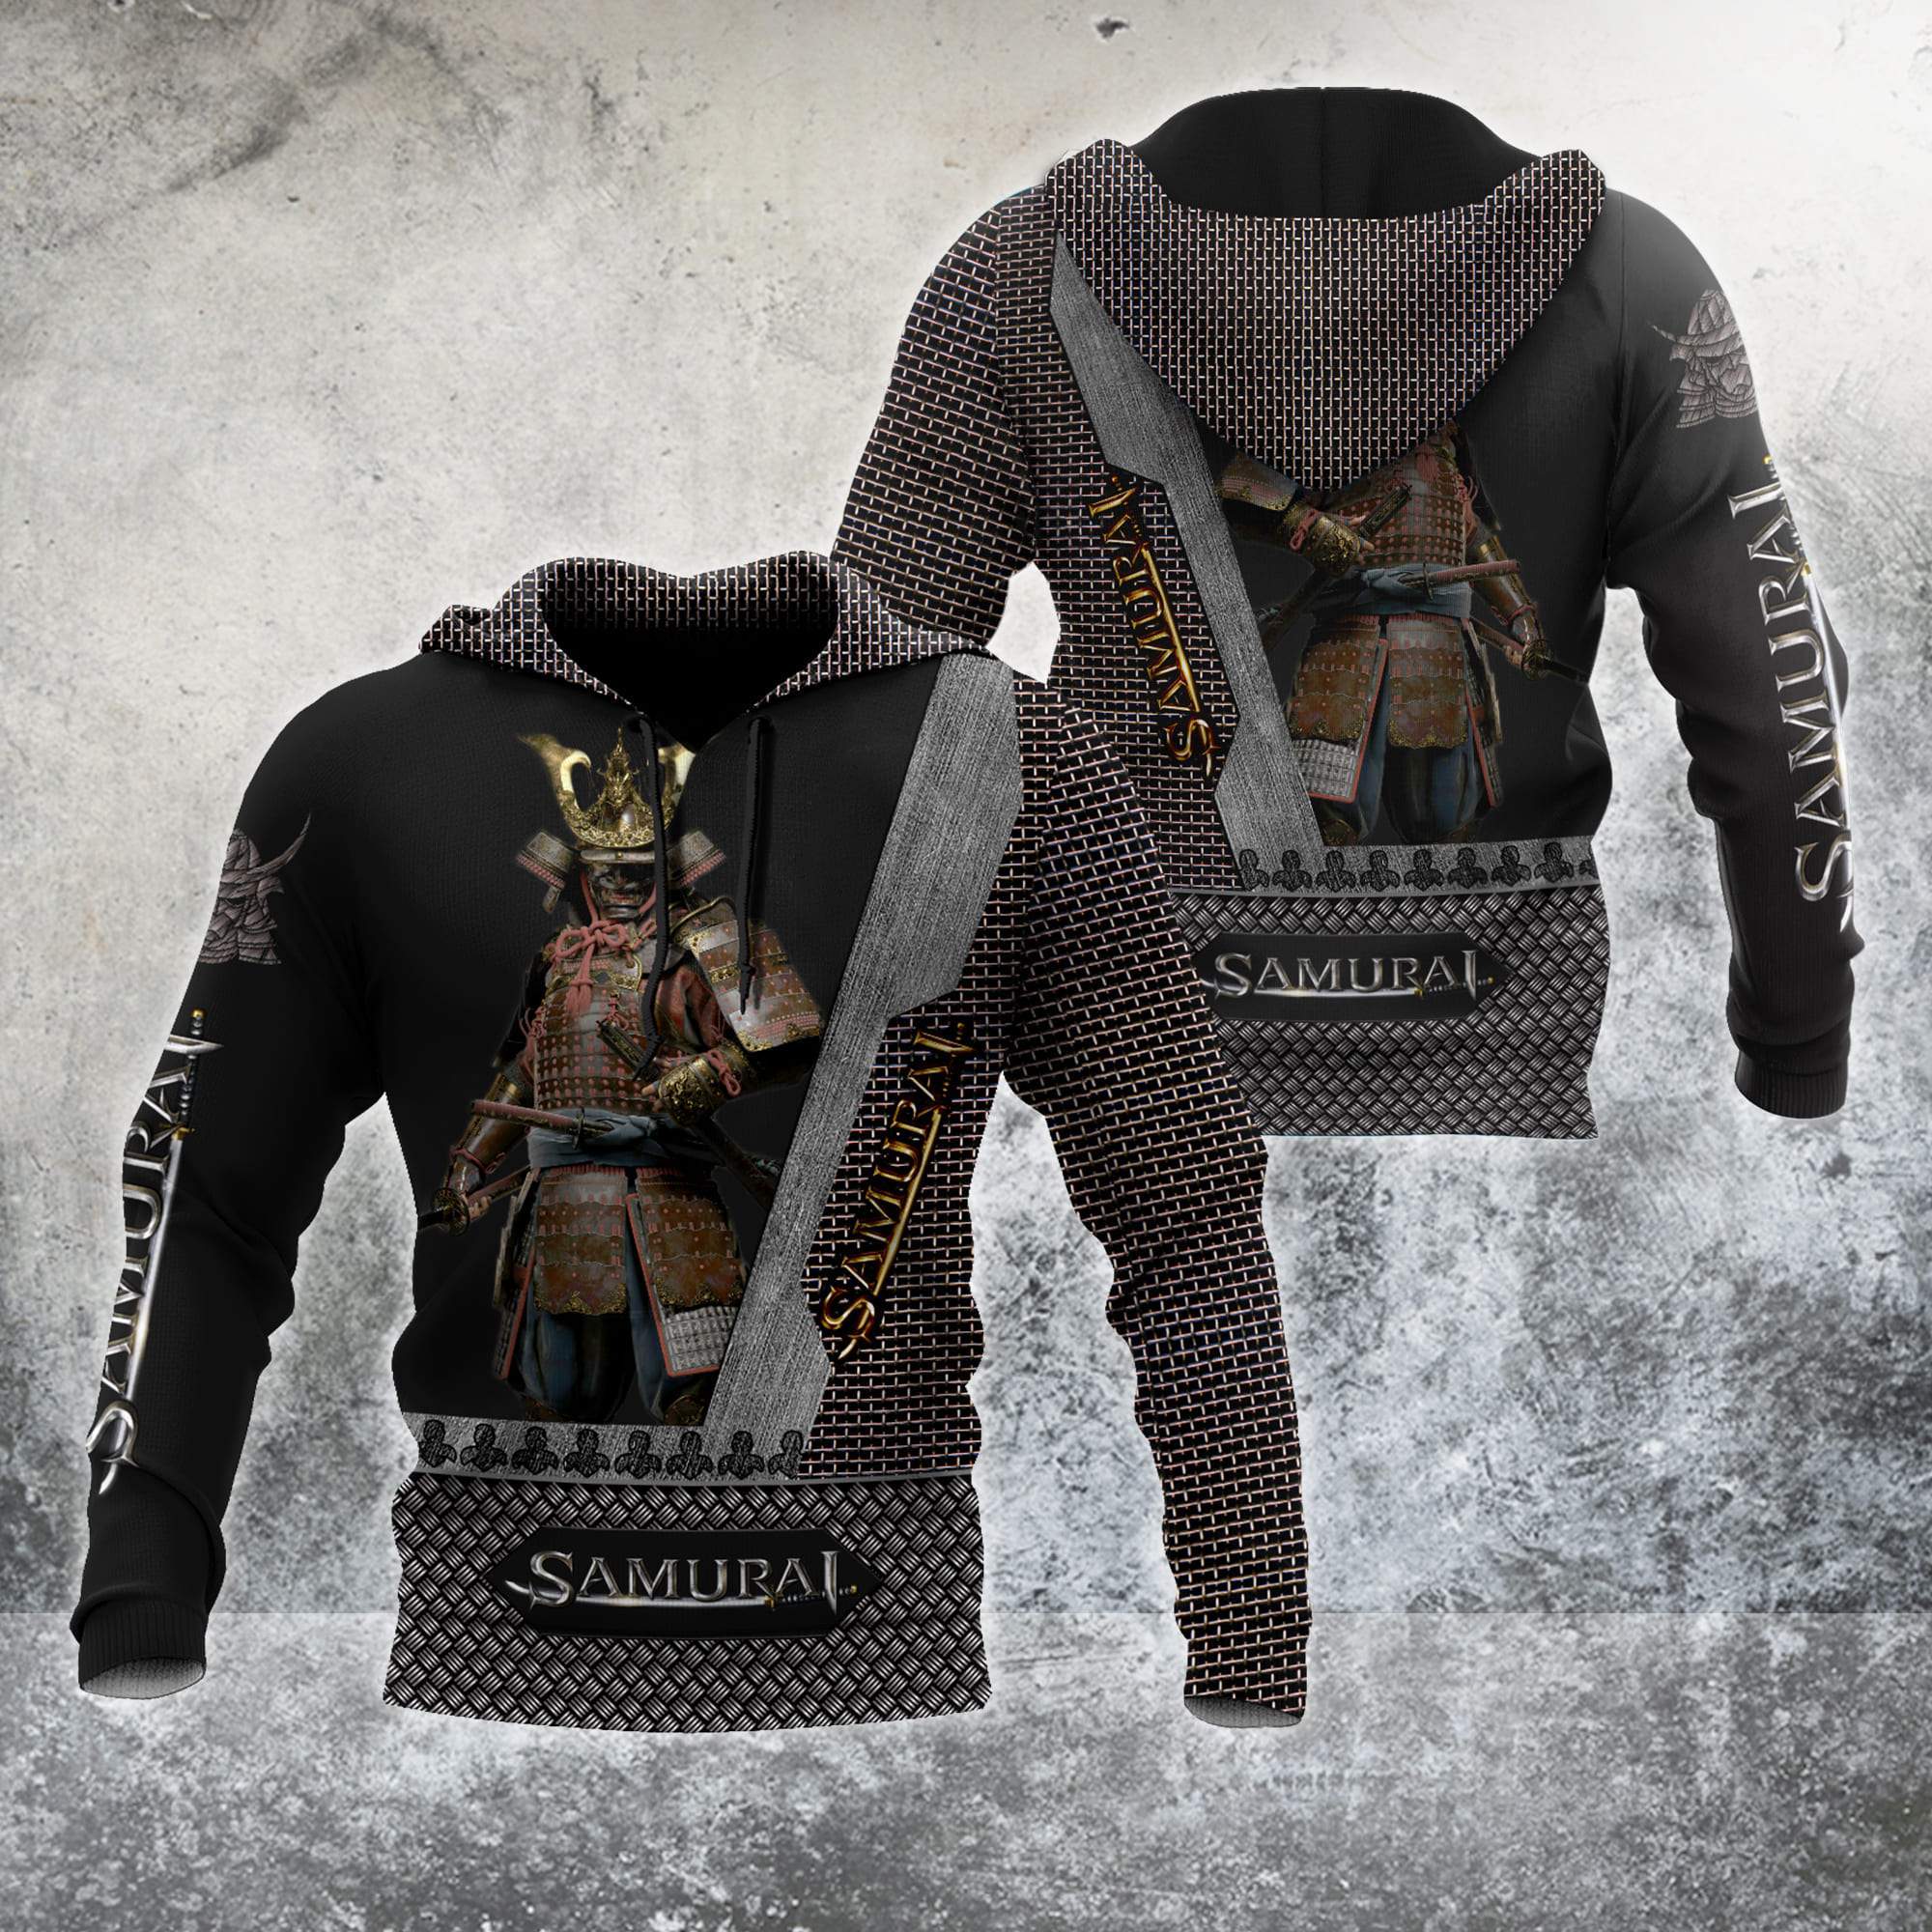 Samurai all over printed hoodie and t shirt